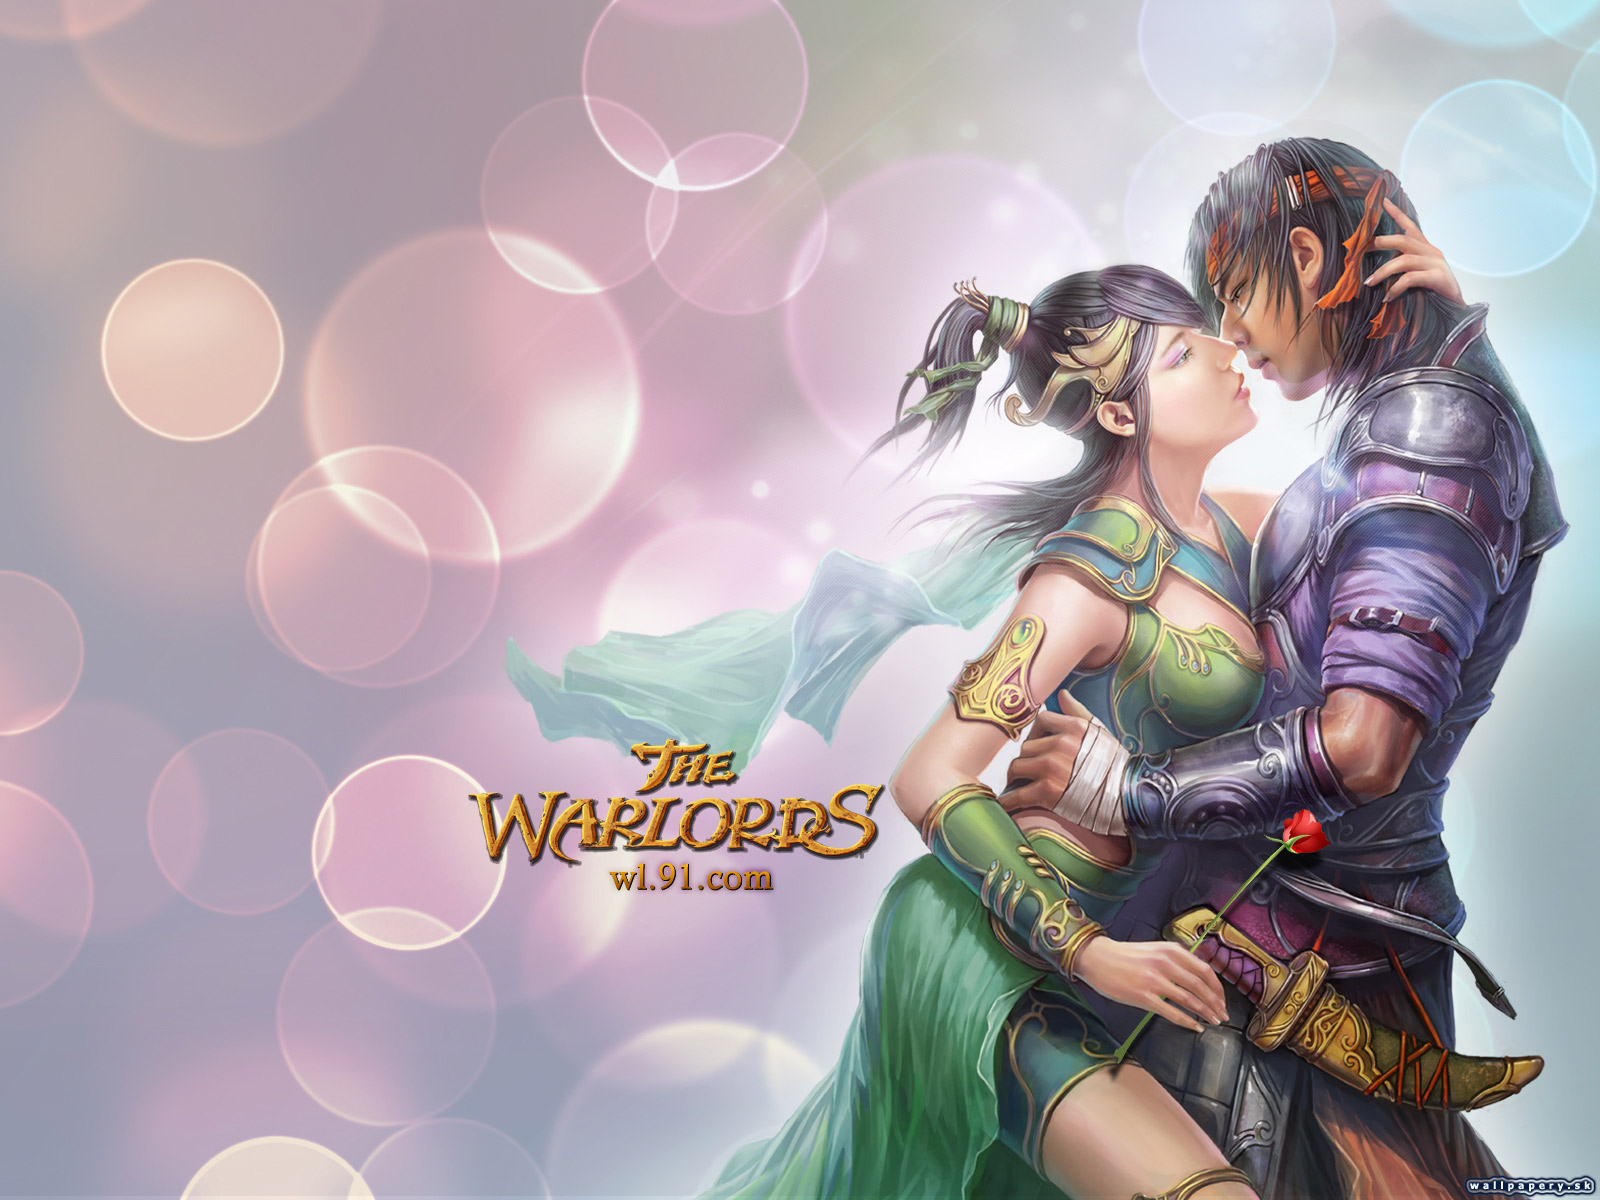 The Warlords - wallpaper 1